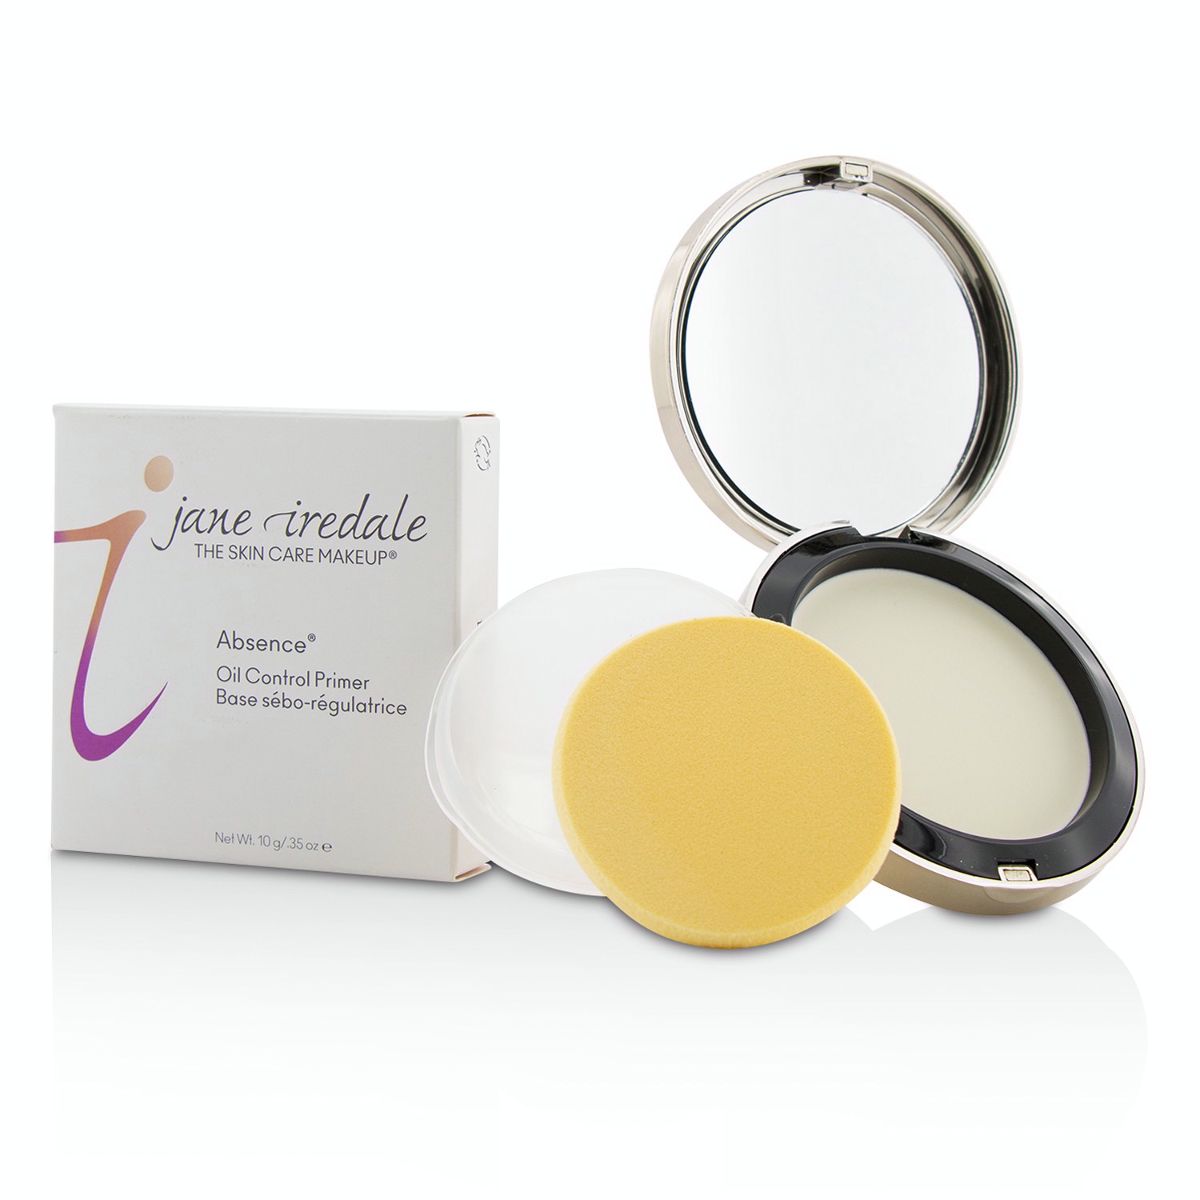 Absence Oil Control Primer Jane Iredale Image